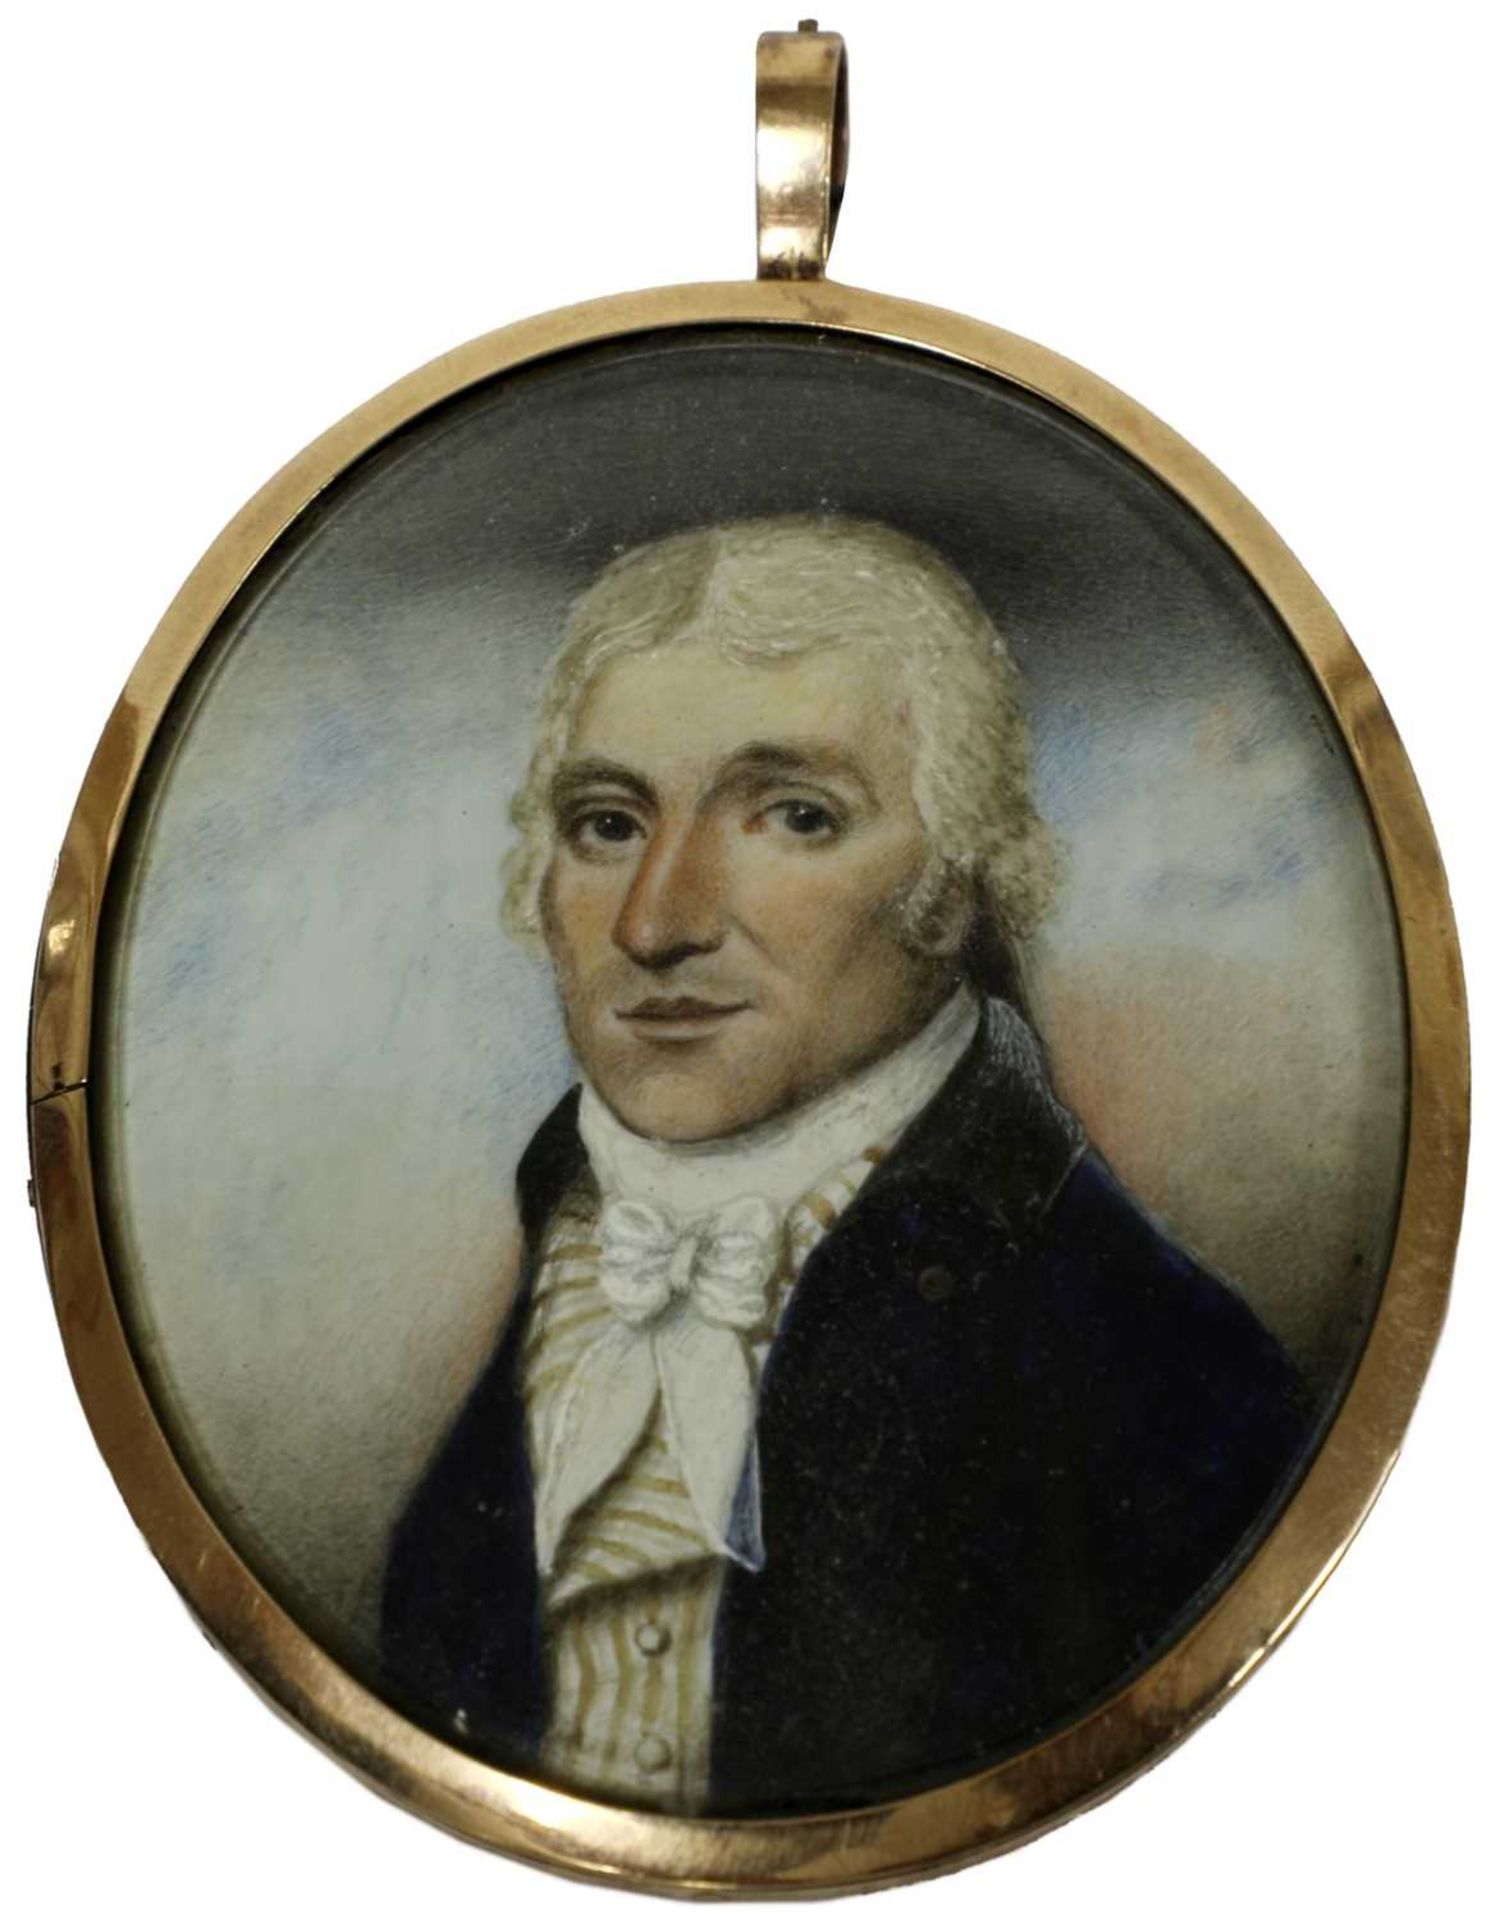 Attributed to Frederick Buck (1771-1840)